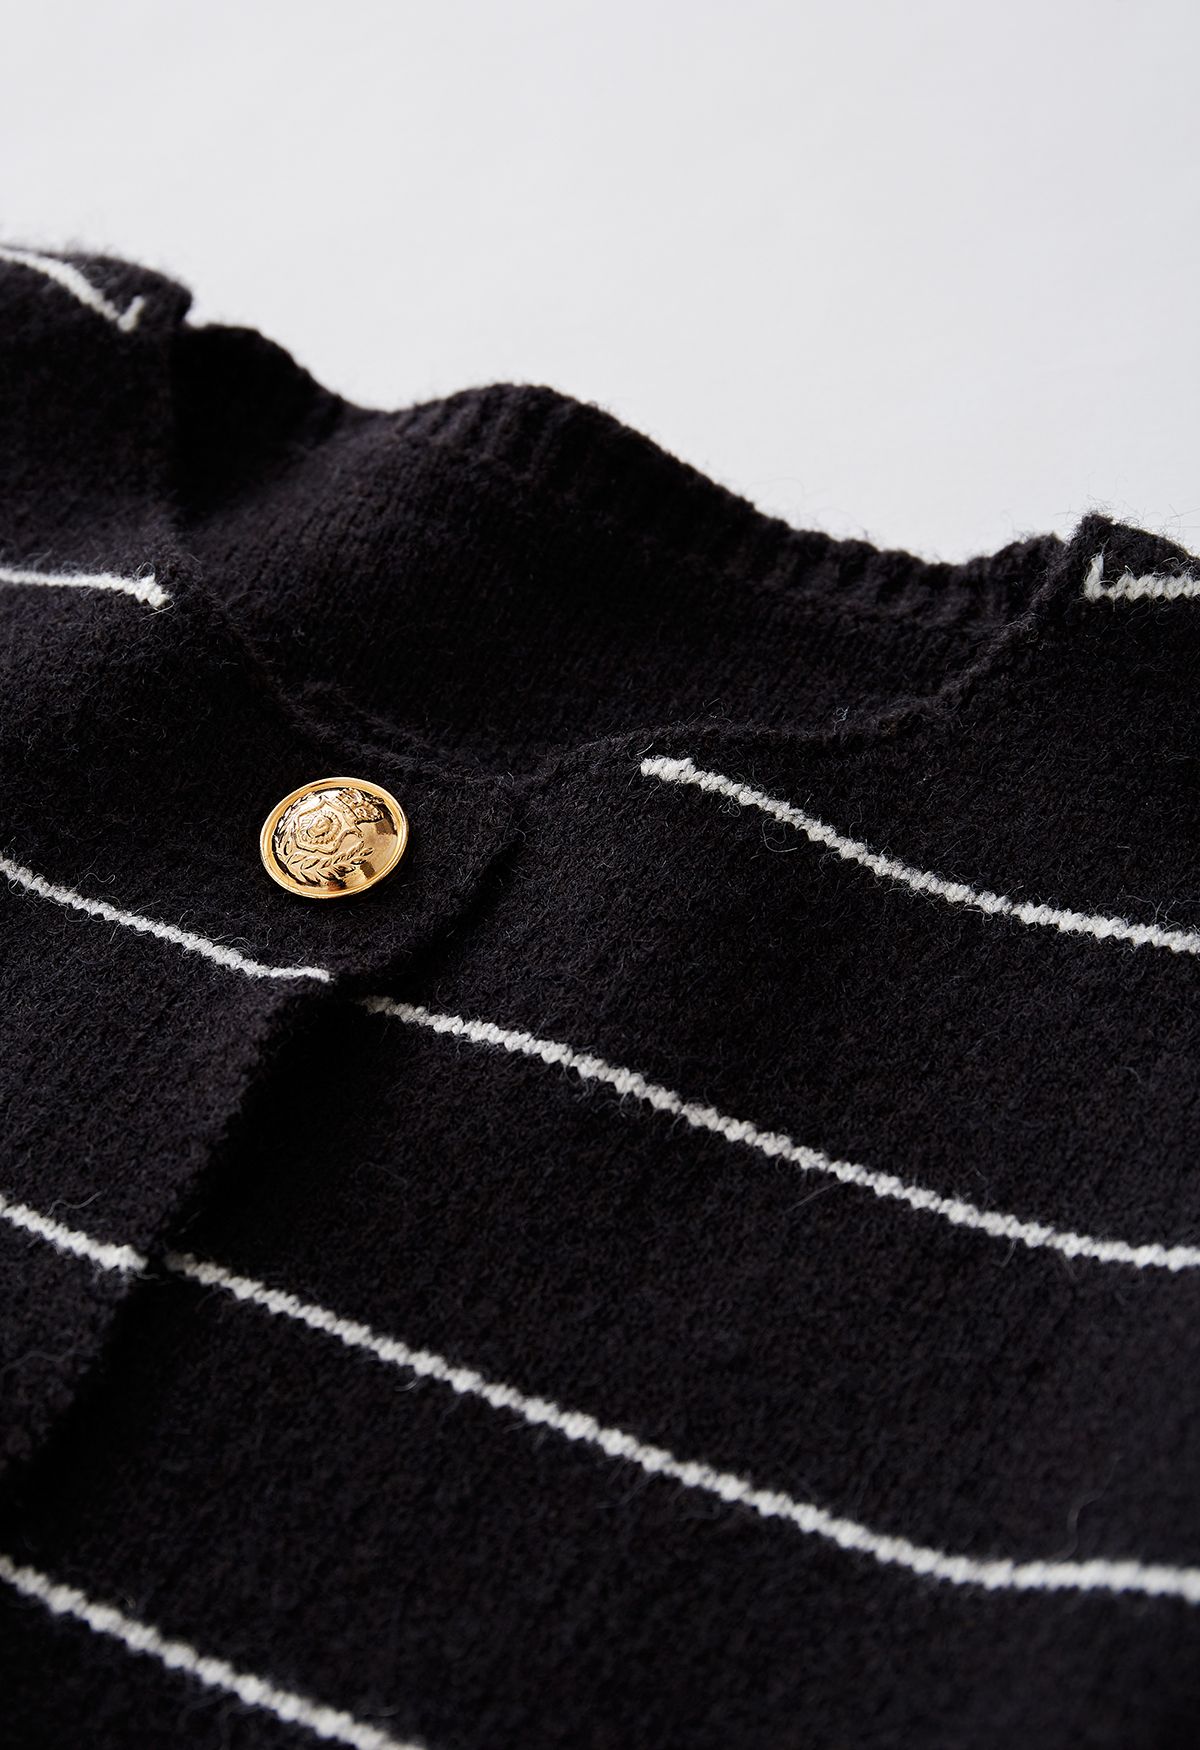 Contrast Stripes Button Down Cardigan in Black